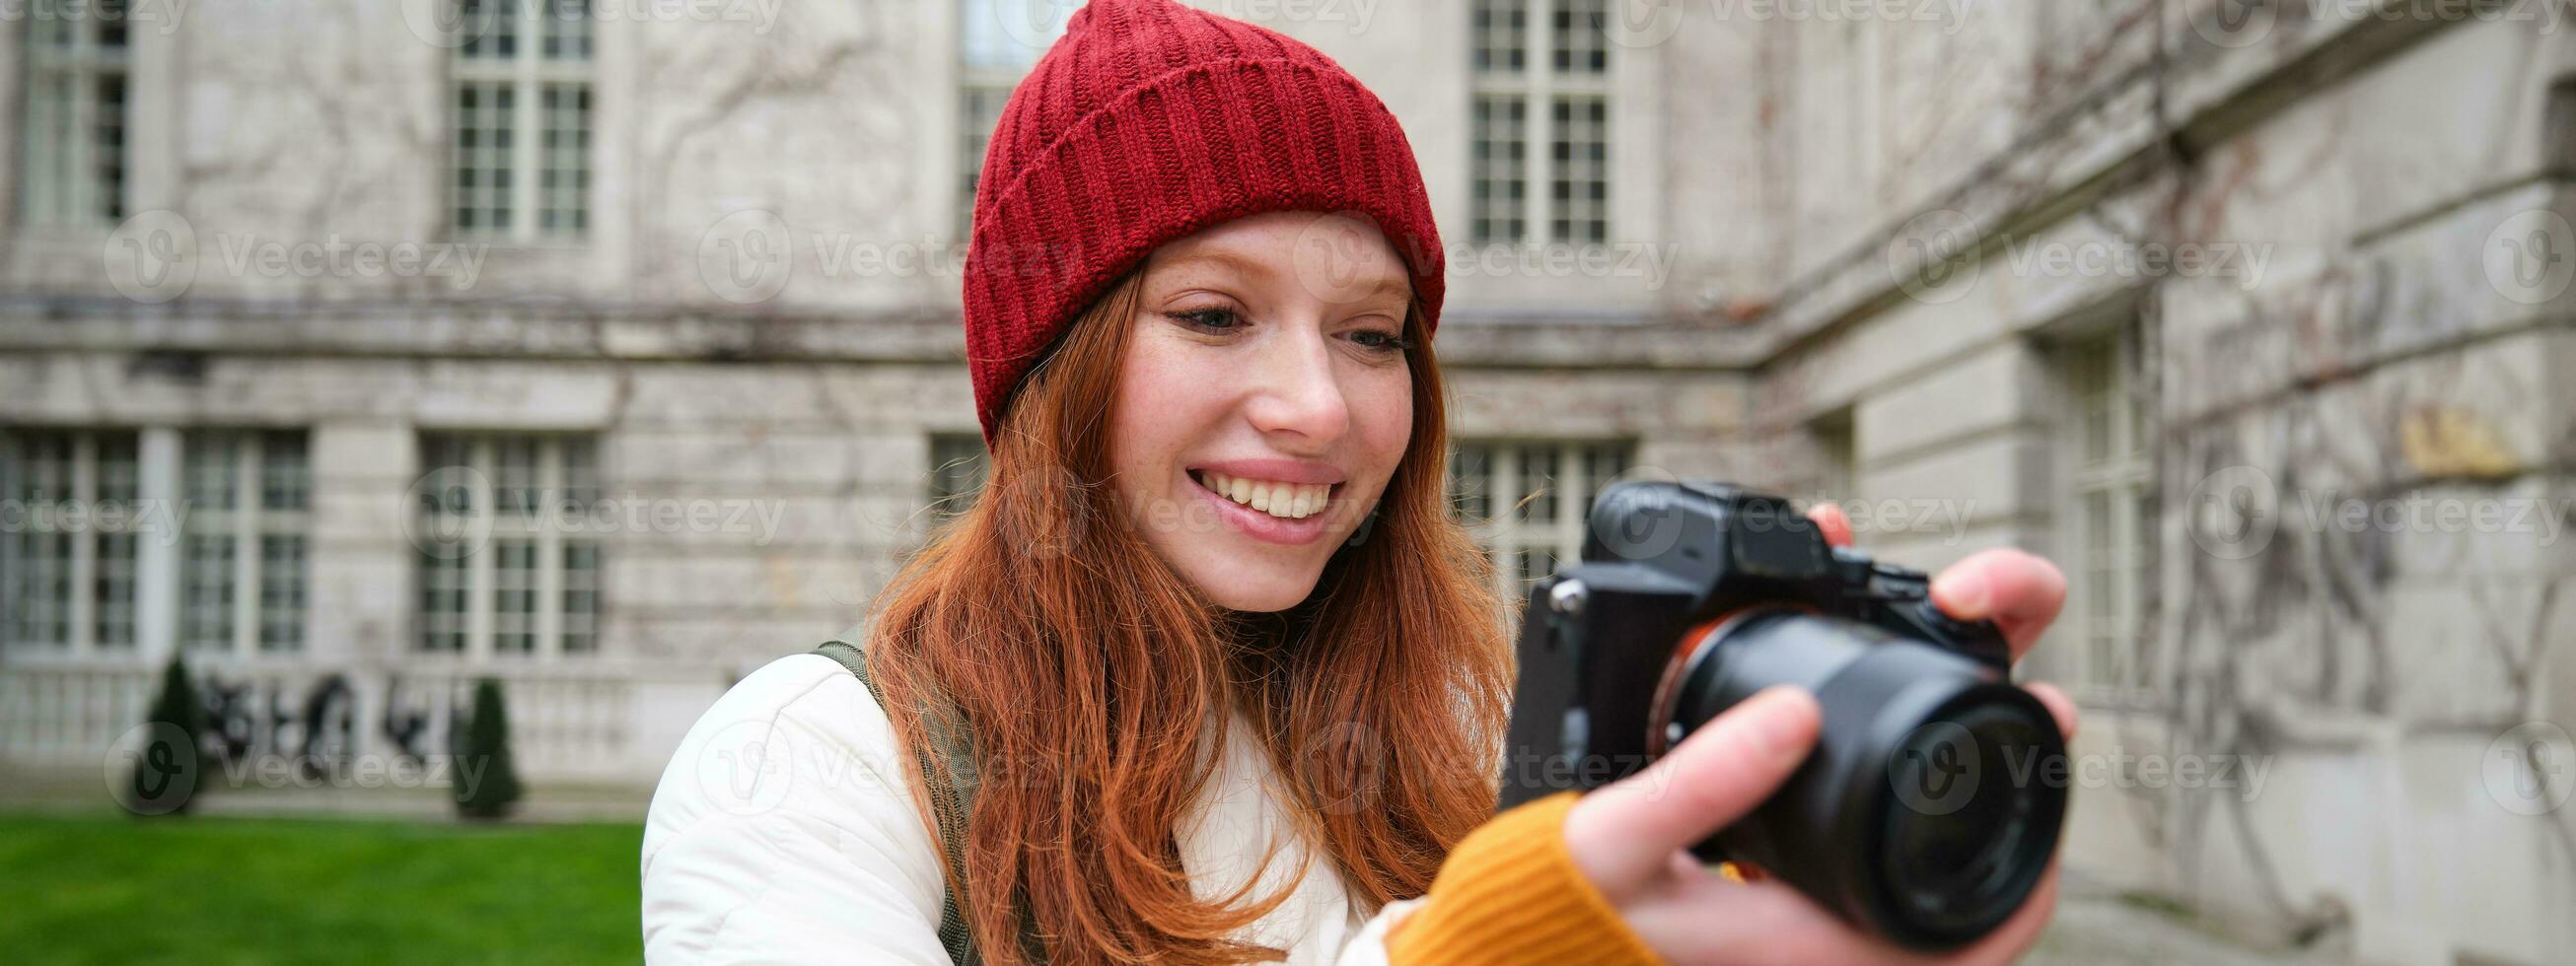 Redhead girl photographer takes photos on professional camera outdoors, captures streetstyle shots, looks excited while taking pictures